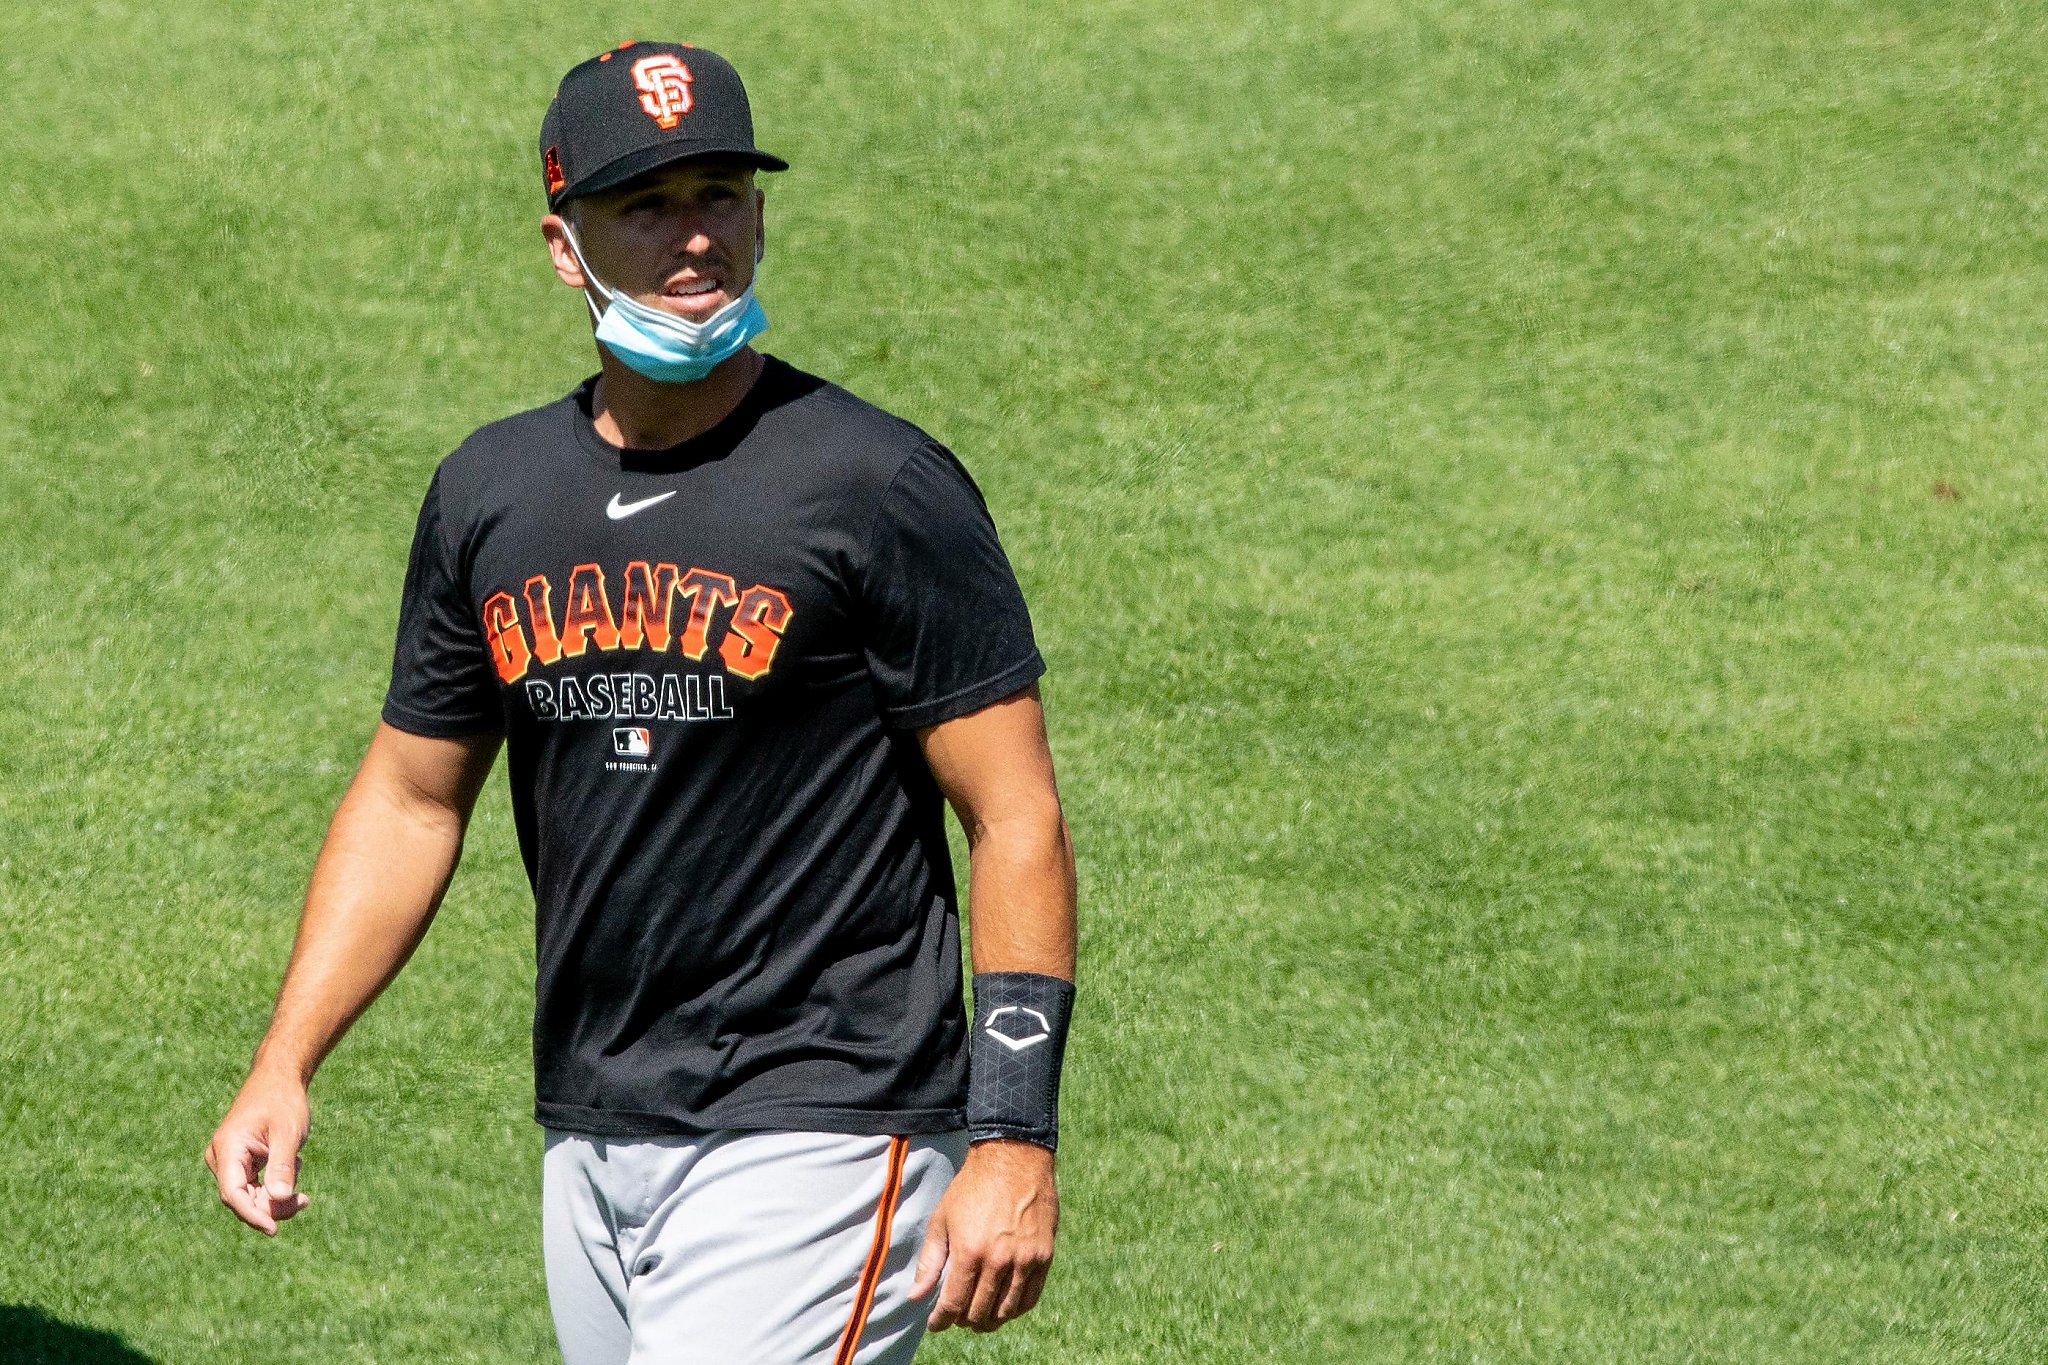 Where will the Giants put their Buster Posey and Barry Bonds statues?